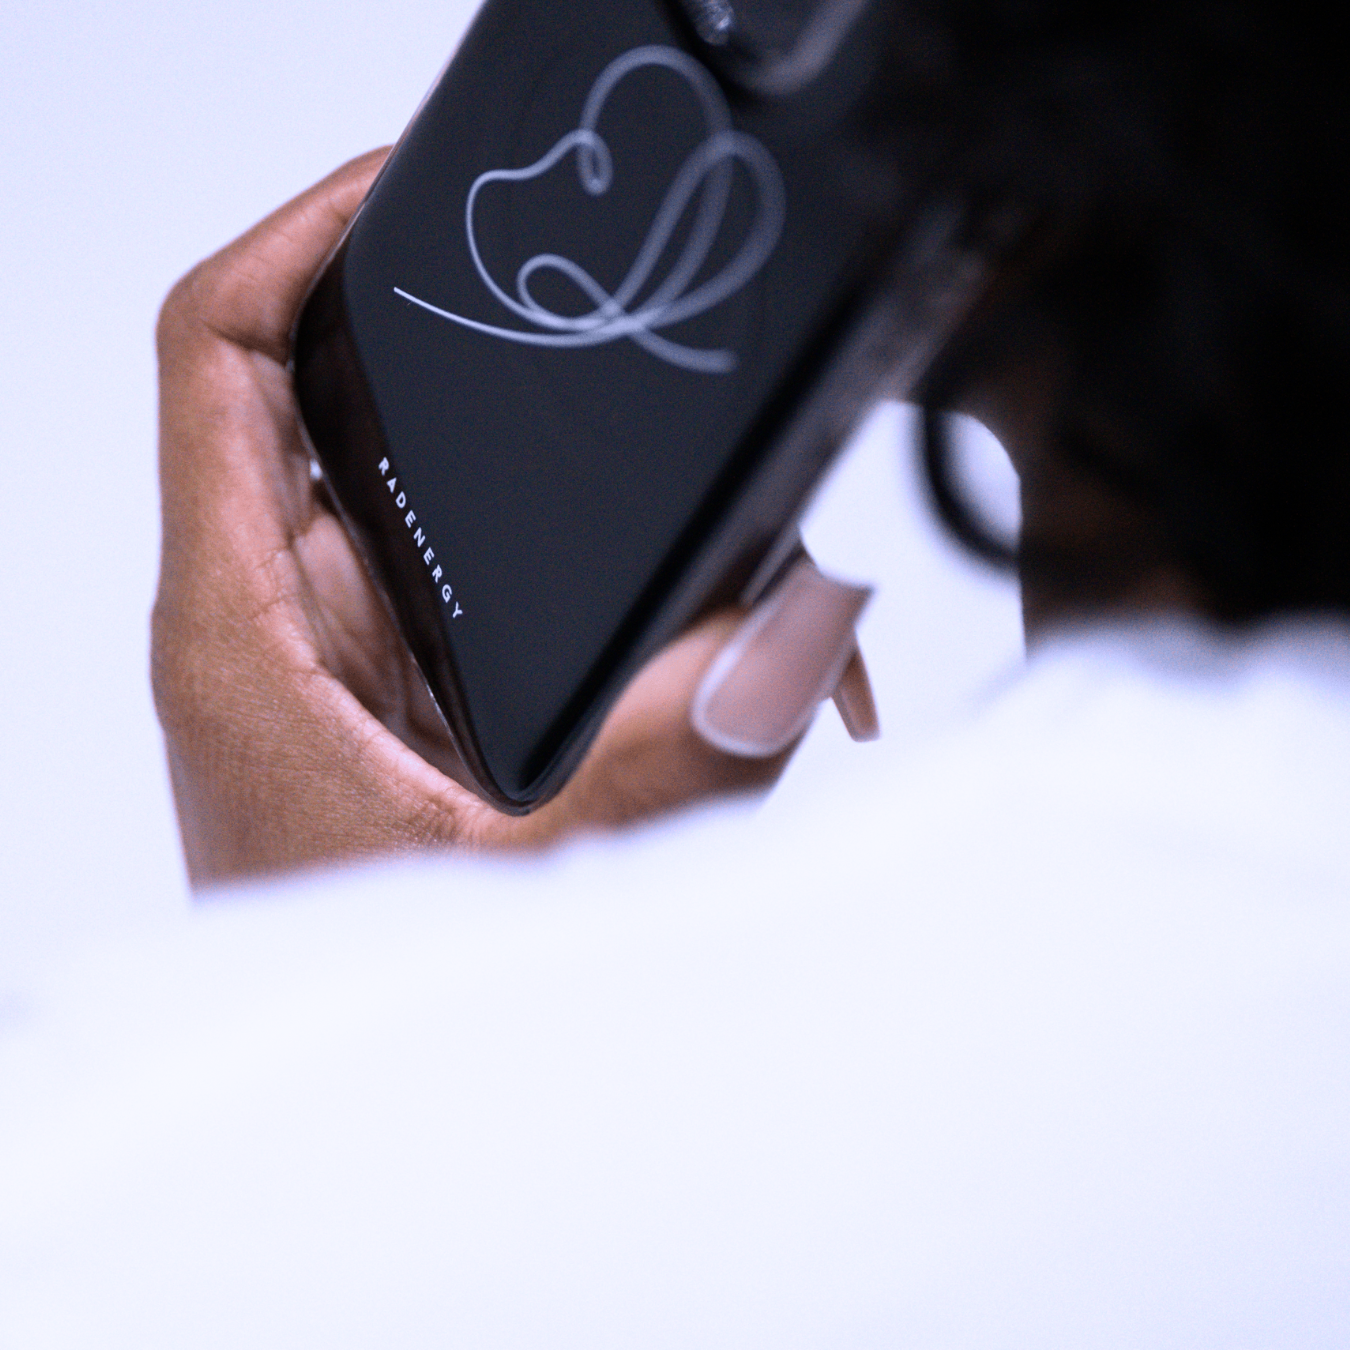 The Butterfly Shungite Phone Case